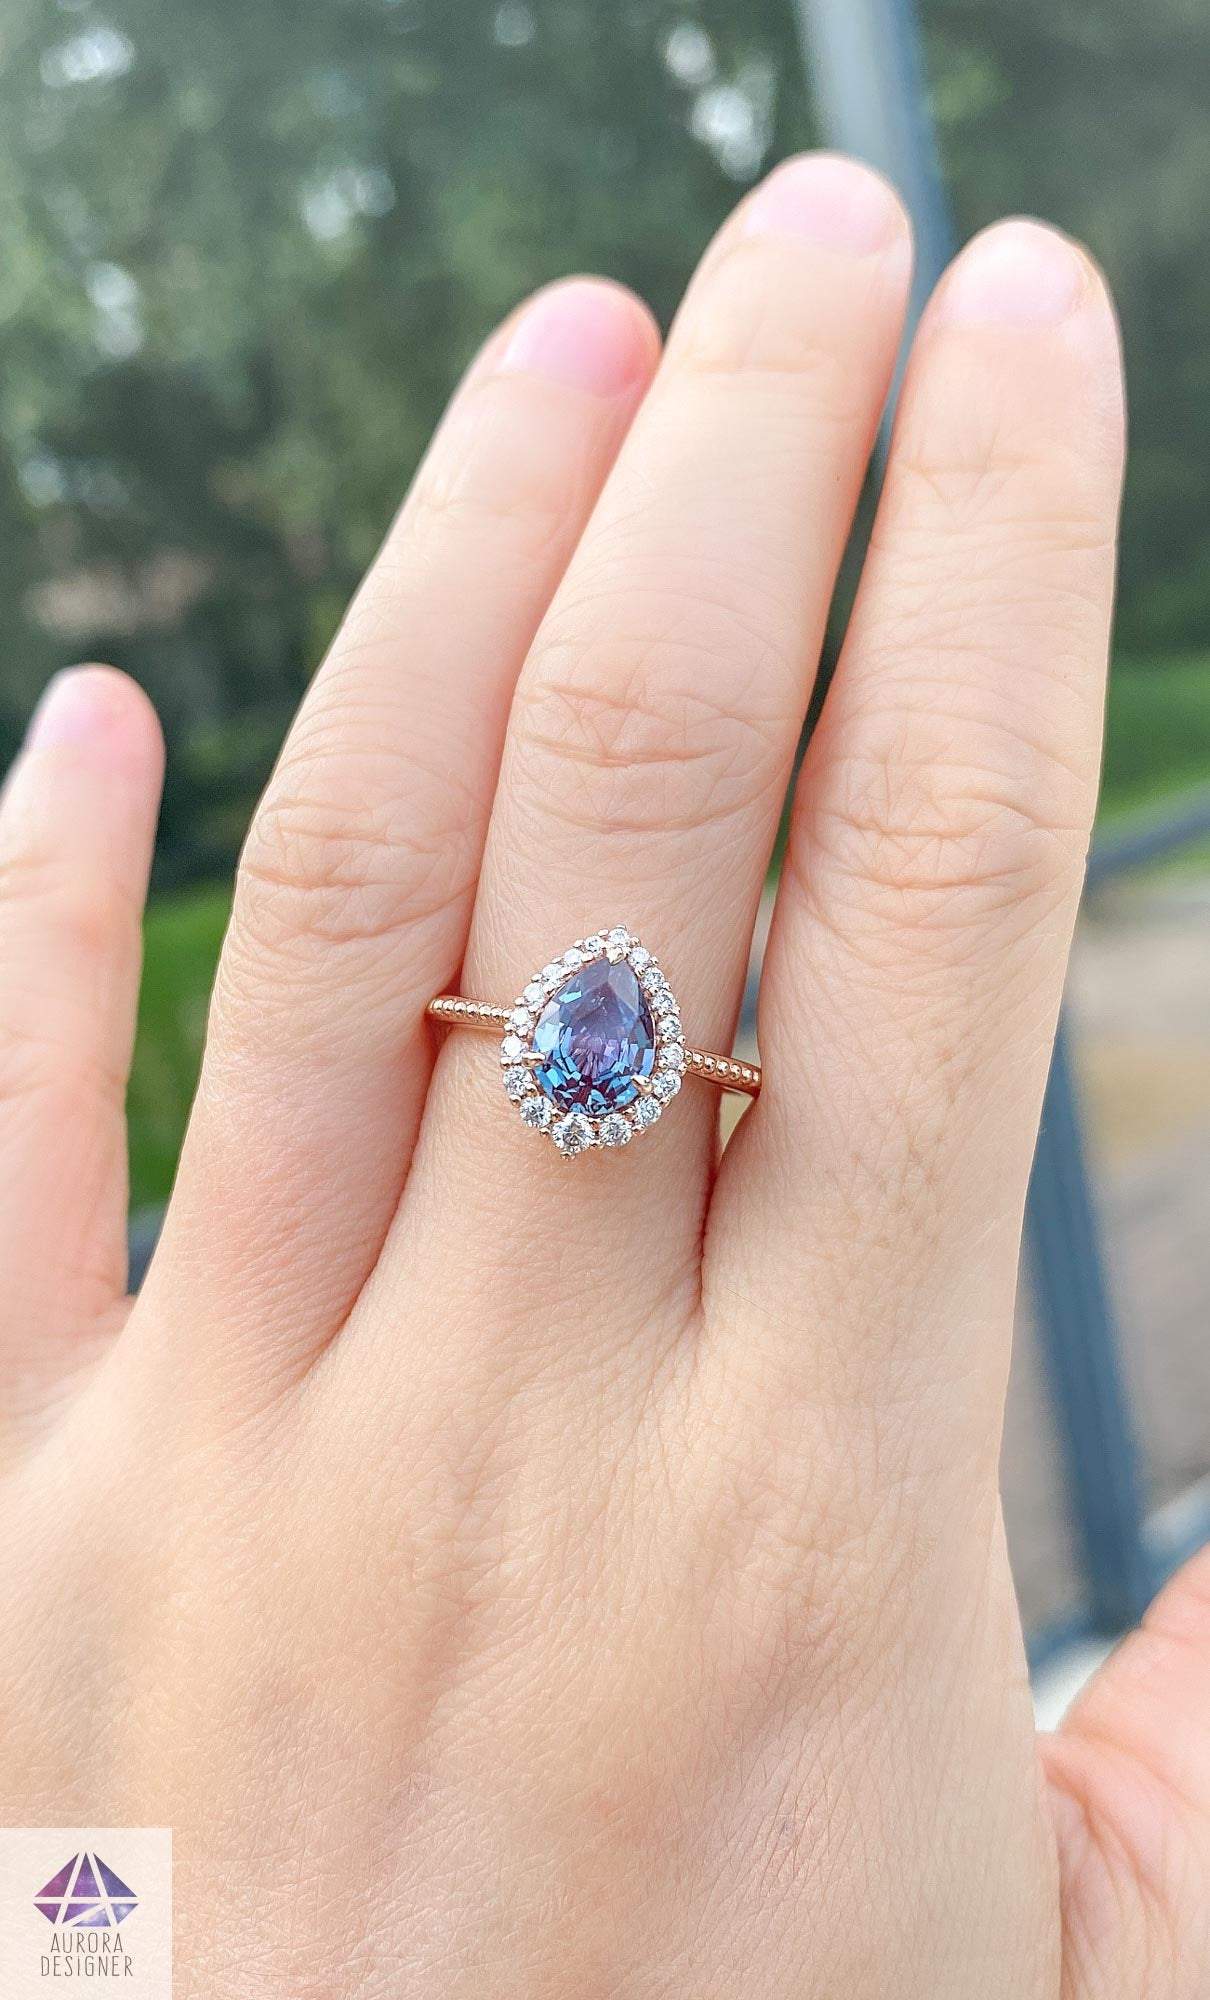 Lab Created Alexandrite For Engagement Ring: Questions, 56% OFF